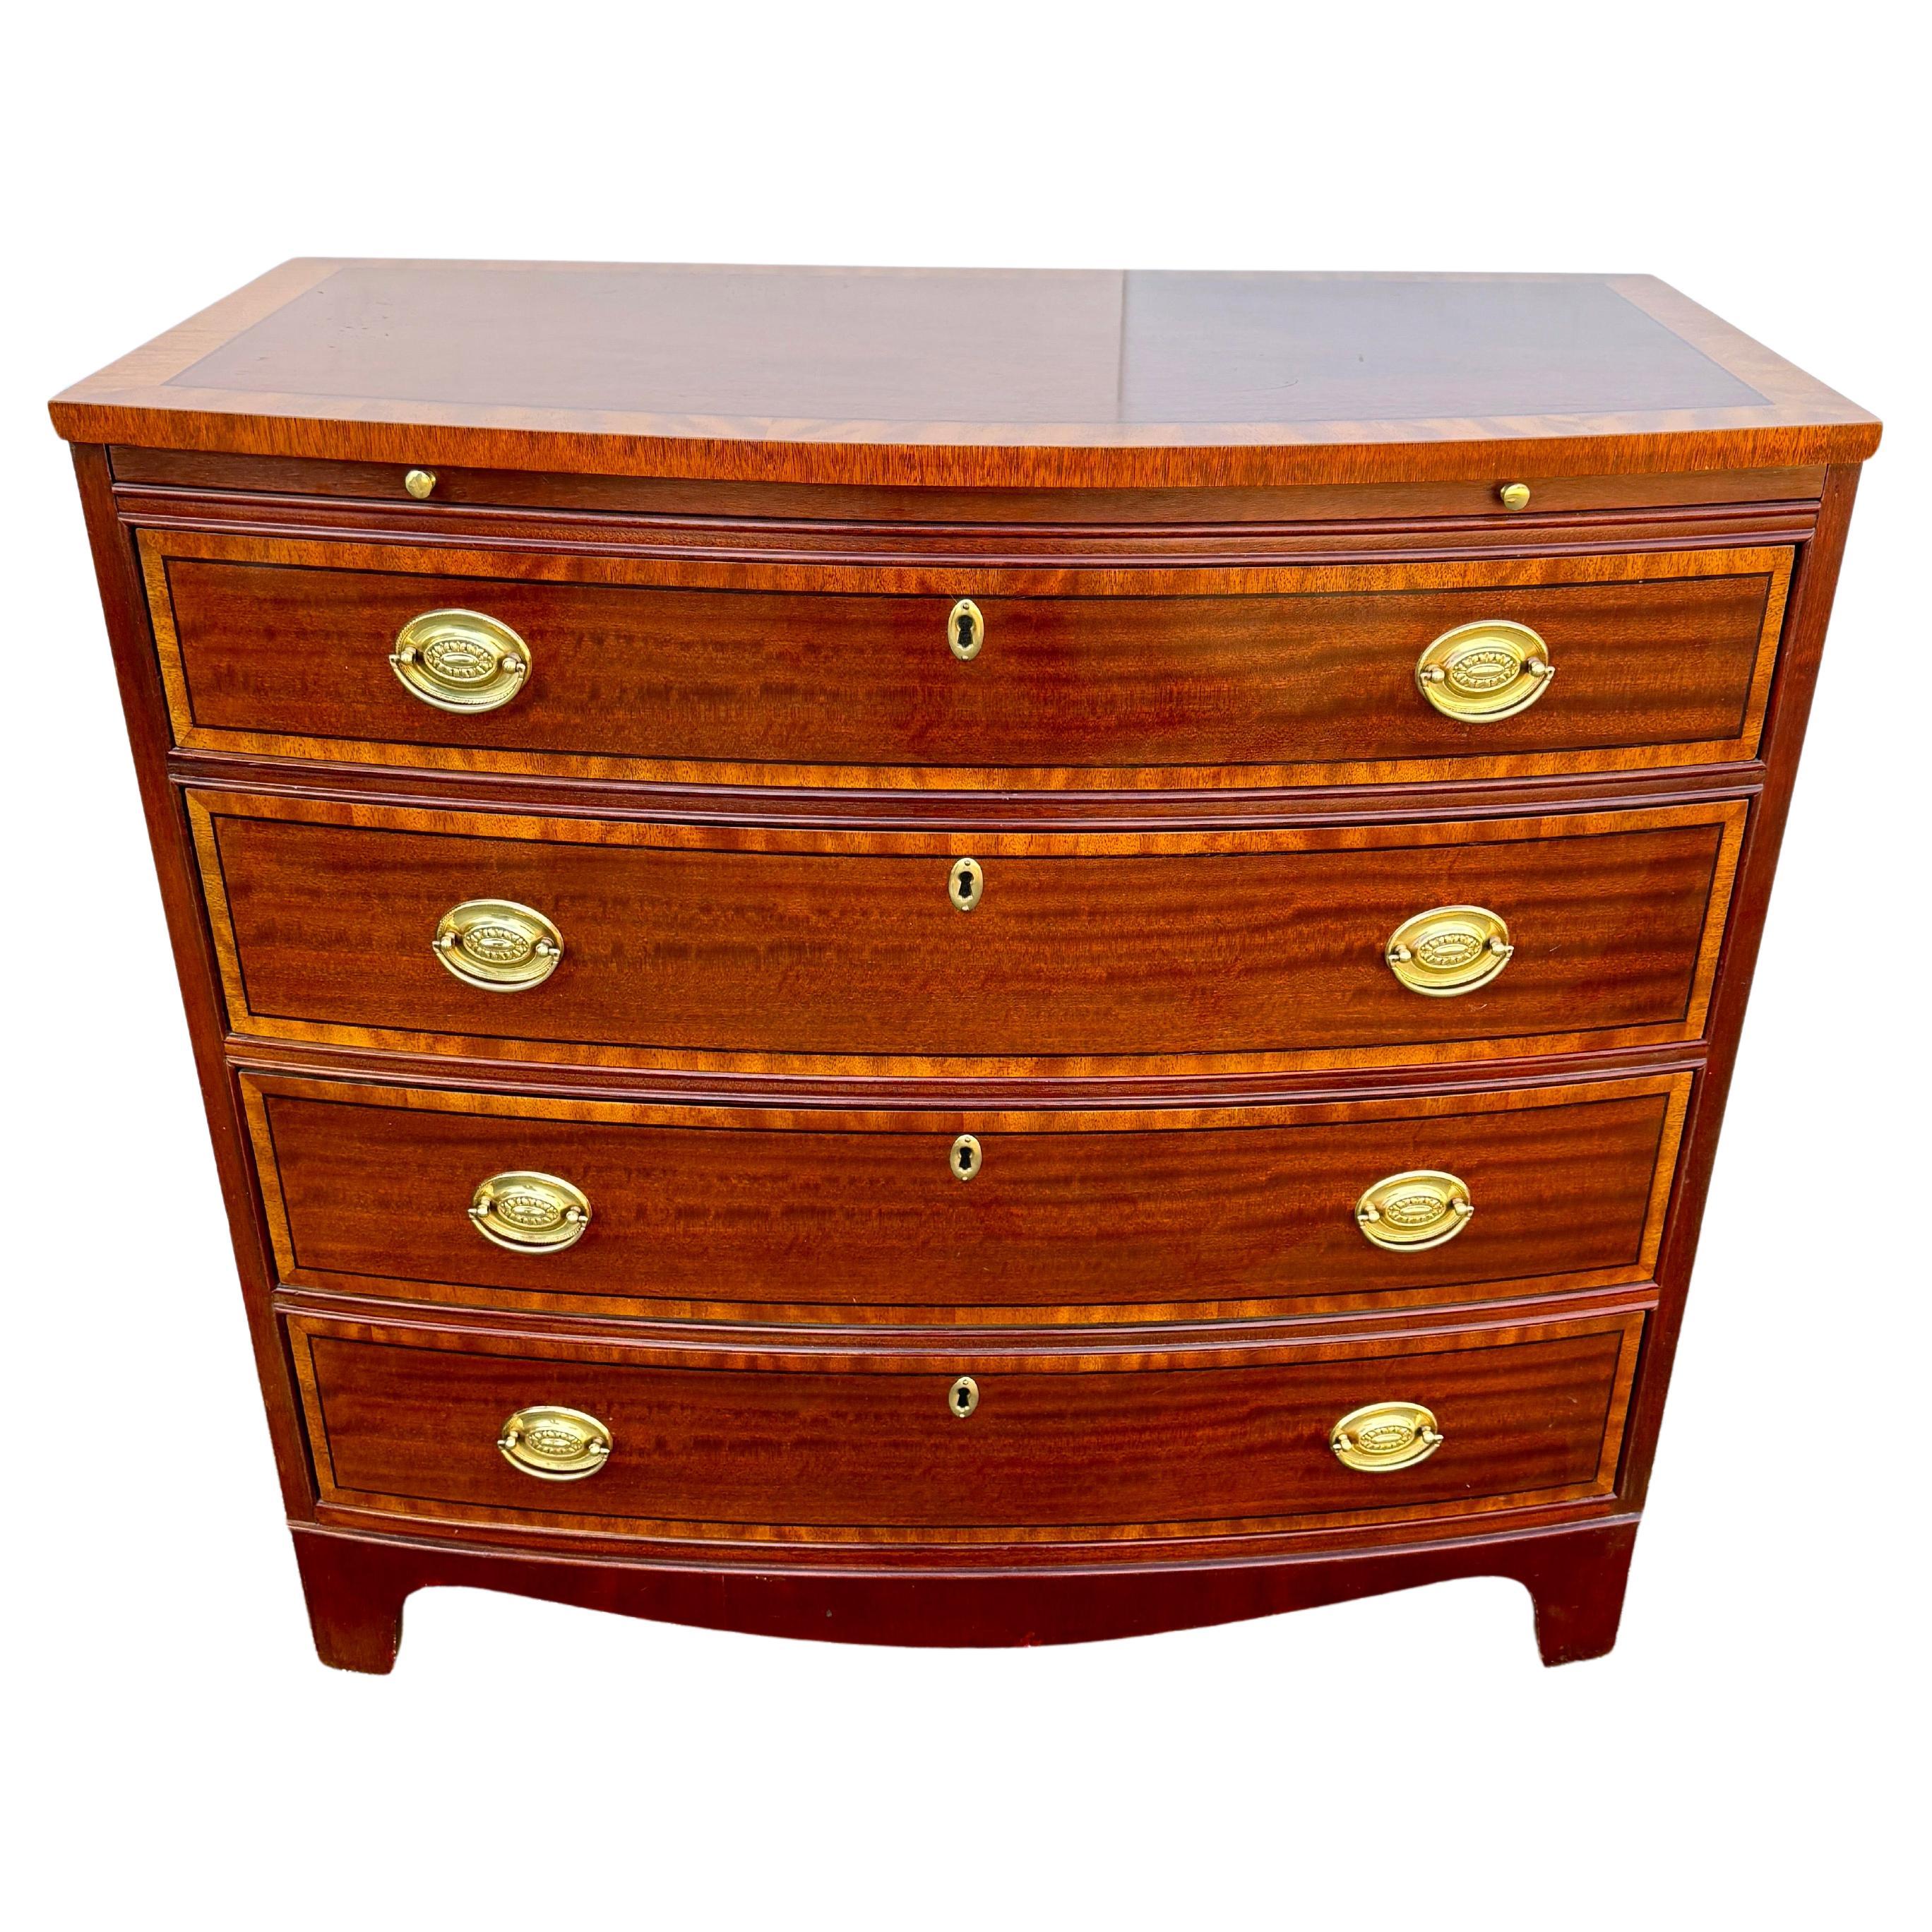 Baker Furniture banded inlay mahogany 4 drawers bow front chest. Satinwood drawer fronts have oval brass hardware. Pull out writing surface. Oak drawer construction.
Tri-State, DC and PA delivery before Christmas.